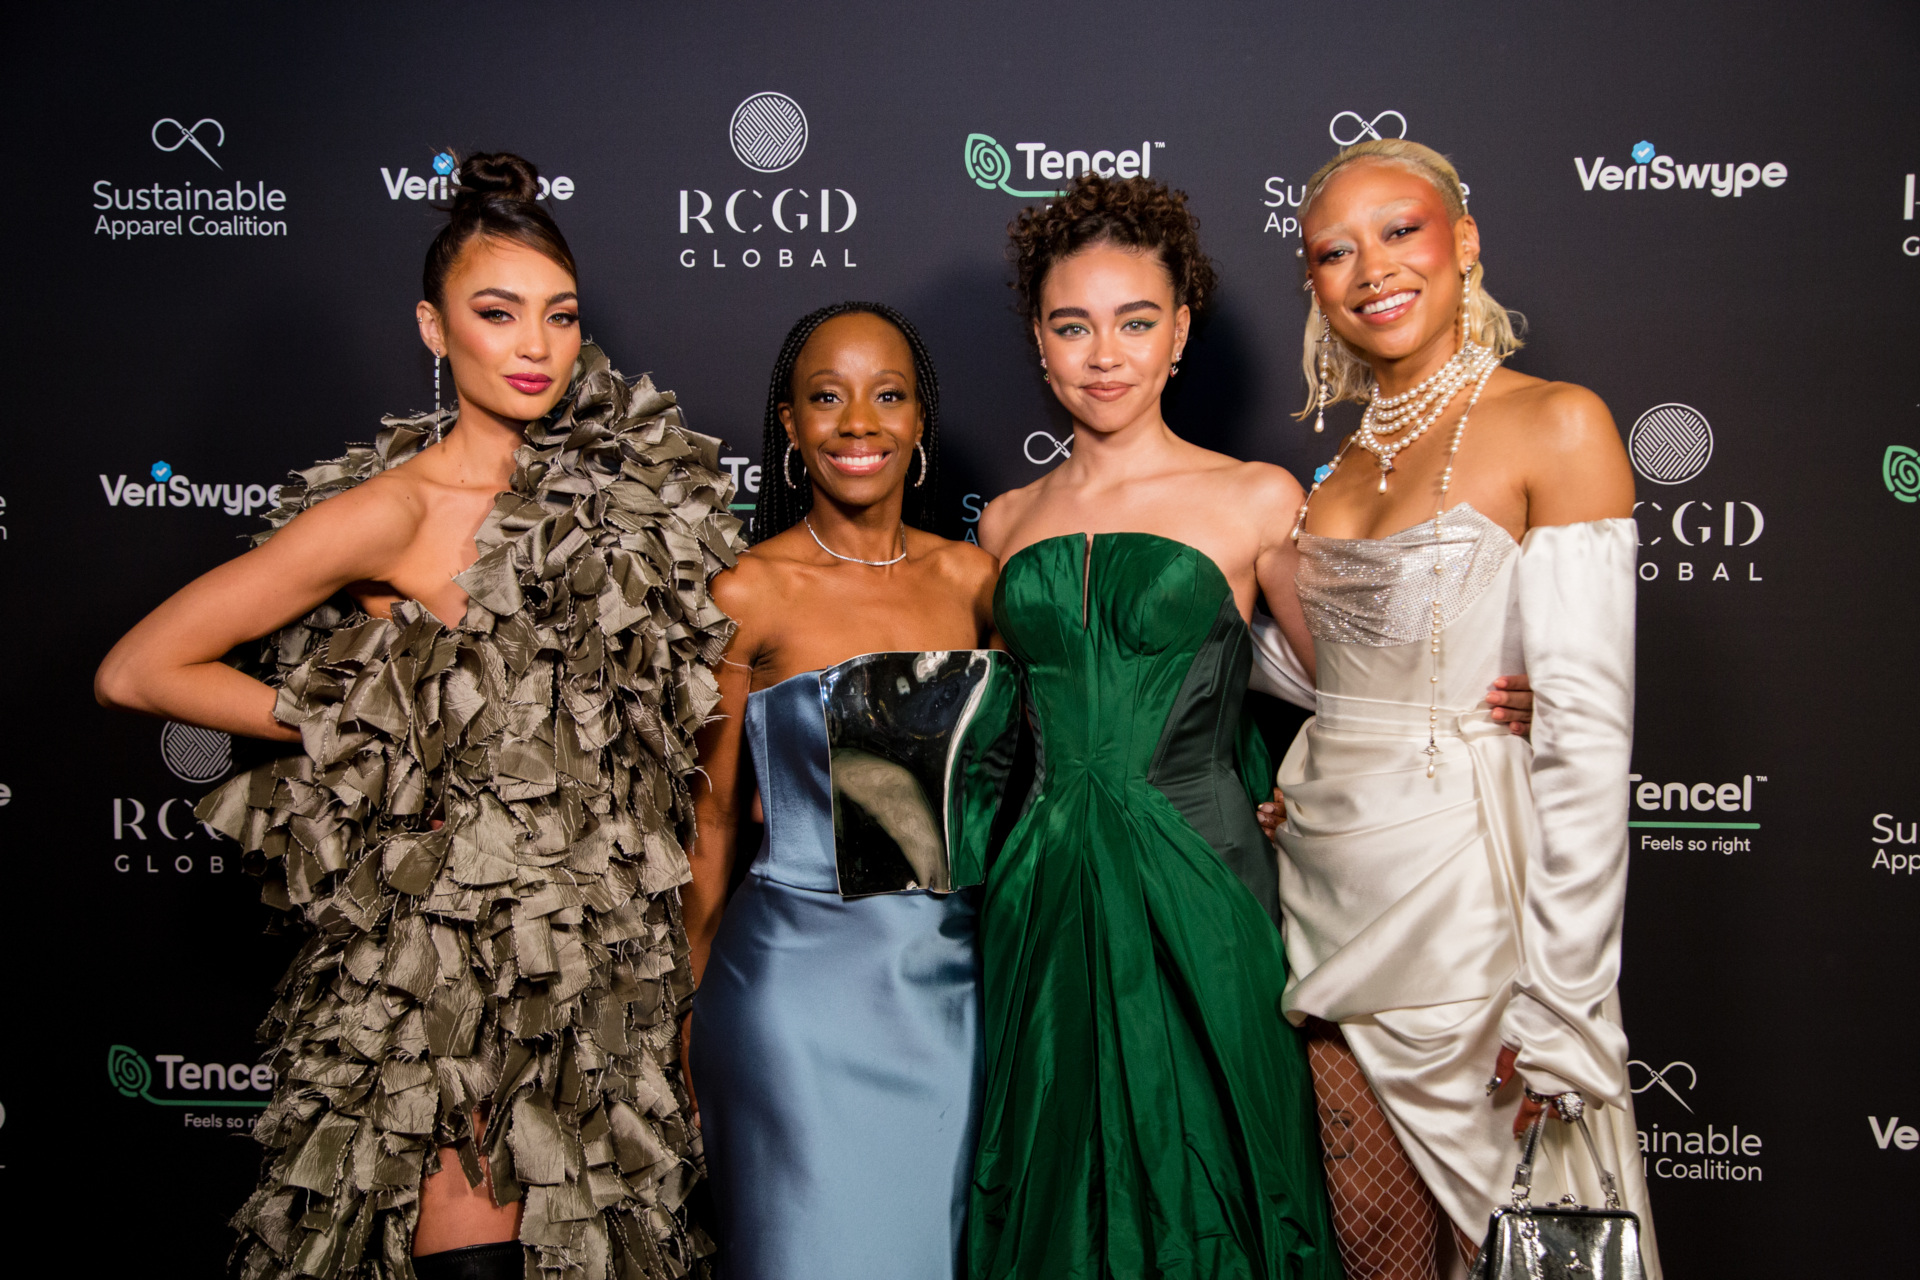 Getting Ready For The Oscars 2022 With Star Of 'You' And Eco-Ambassador Tati  Gabrielle